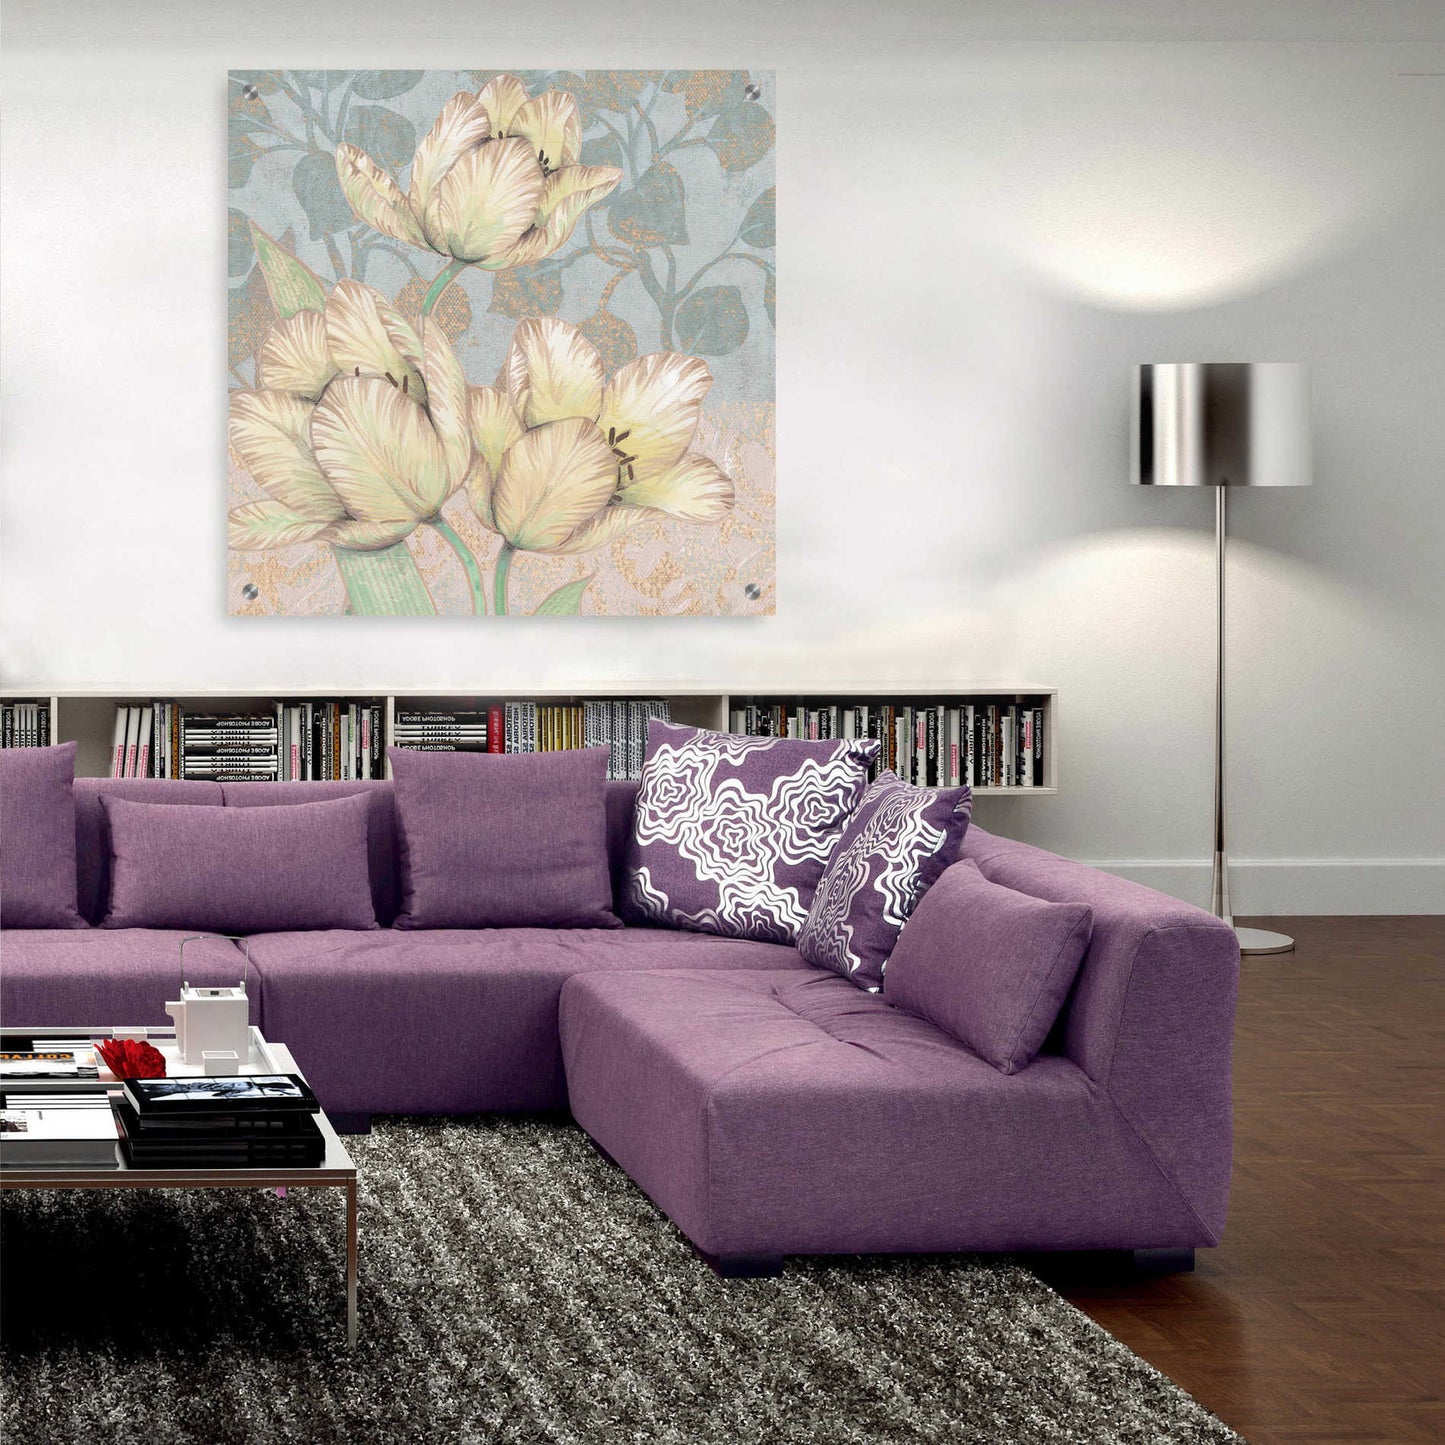 Epic Art 'Trois Fleurs Collection D' by Tim O'Toole, Acrylic Glass Wall Art,36x36